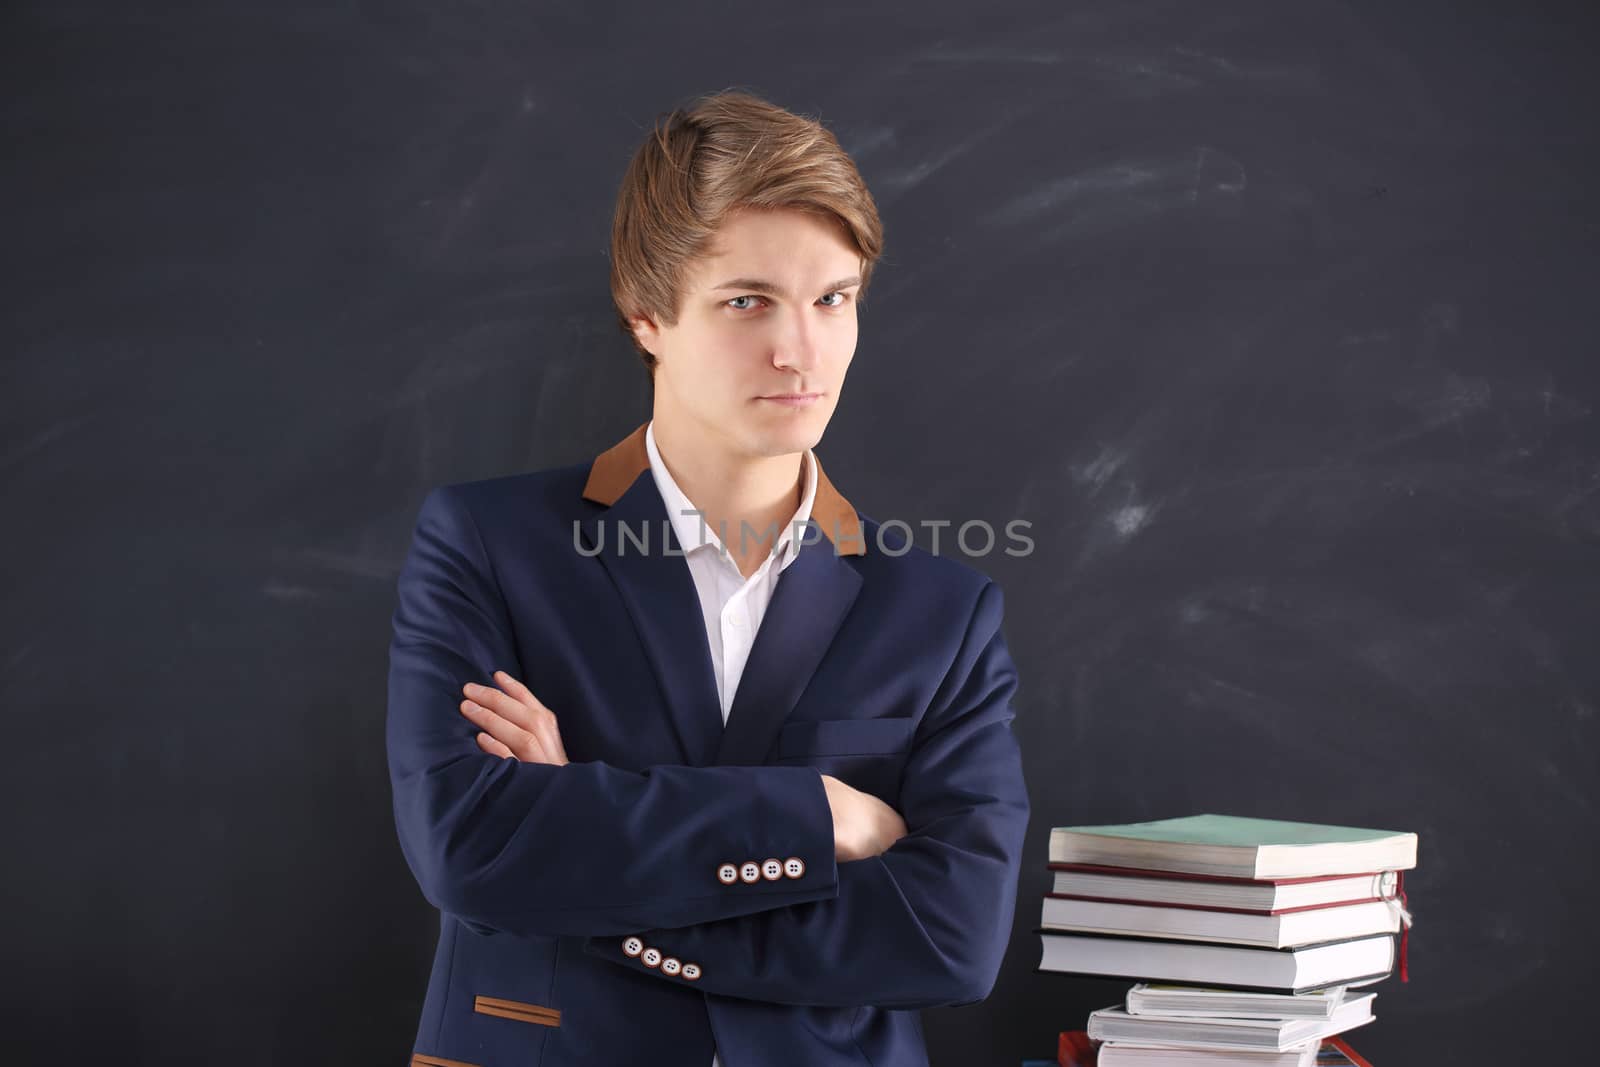 Young, handsome man of success on black chalkboard background